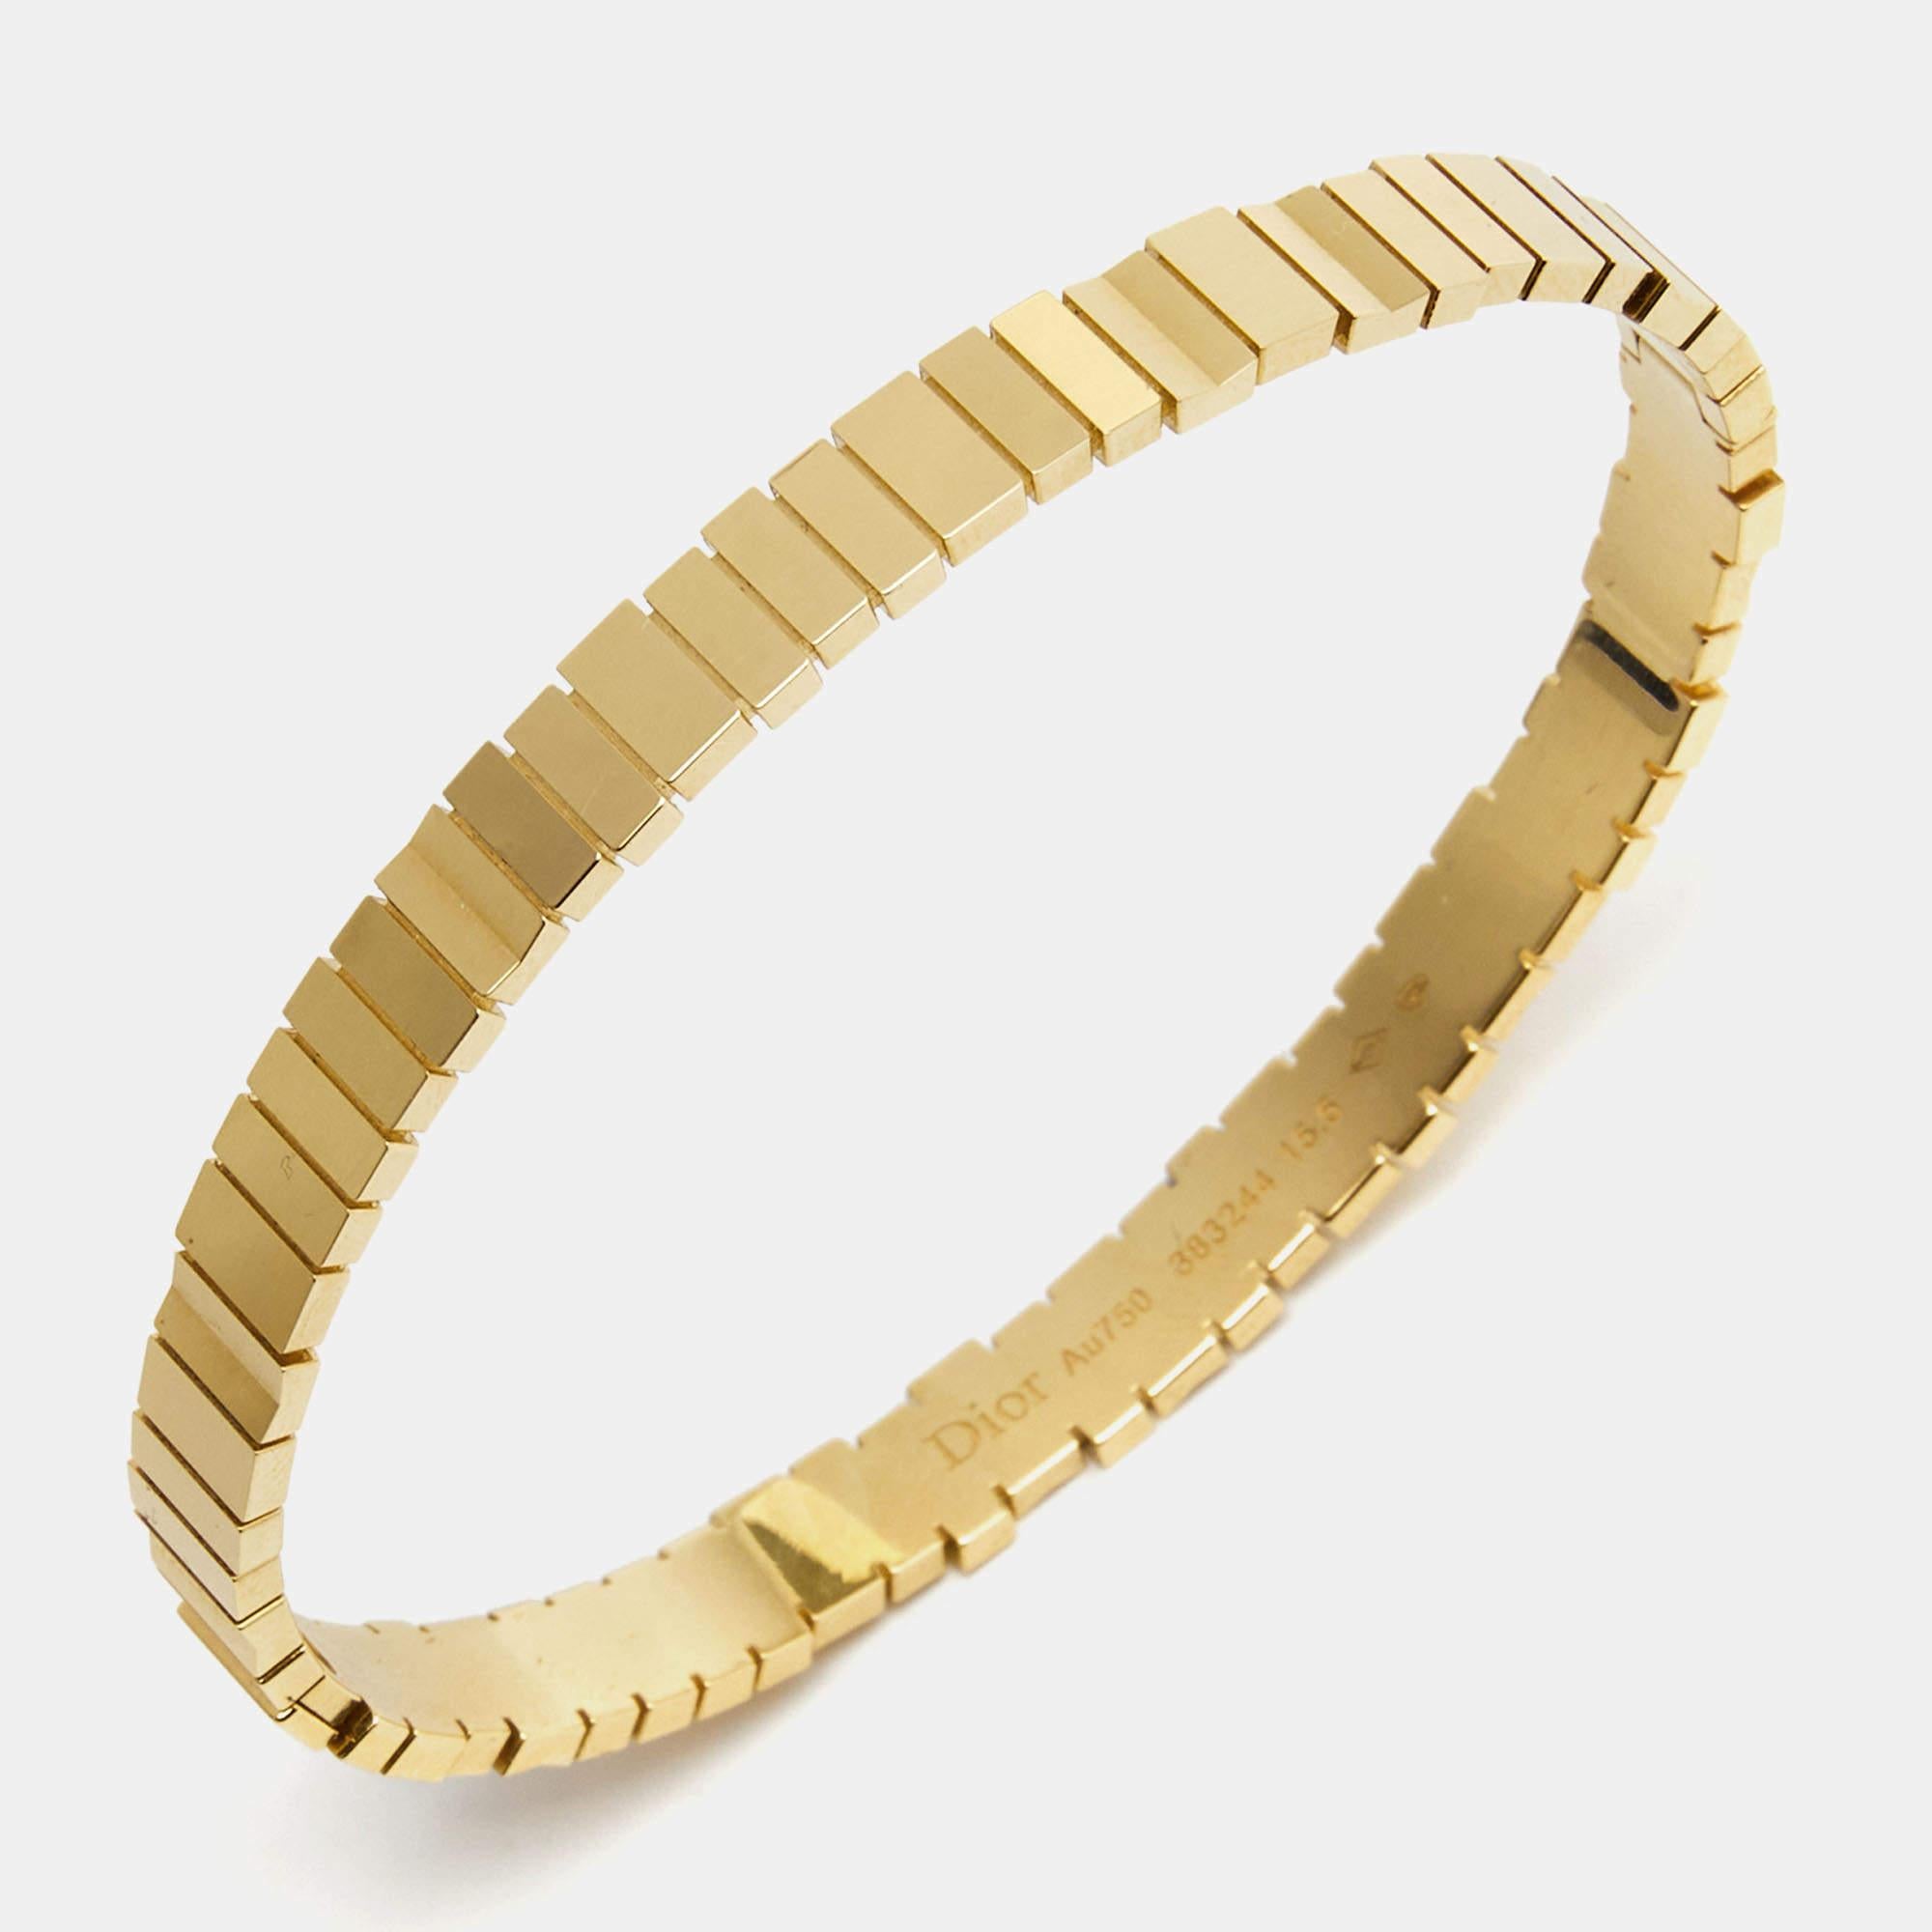 The Dior bracelet is a luxurious and elegant piece of jewelry. Crafted with meticulous attention to detail, this piece features a bangle made of exquisite 18k yellow gold. Its sleek design and timeless appeal make it a perfect accessory for any